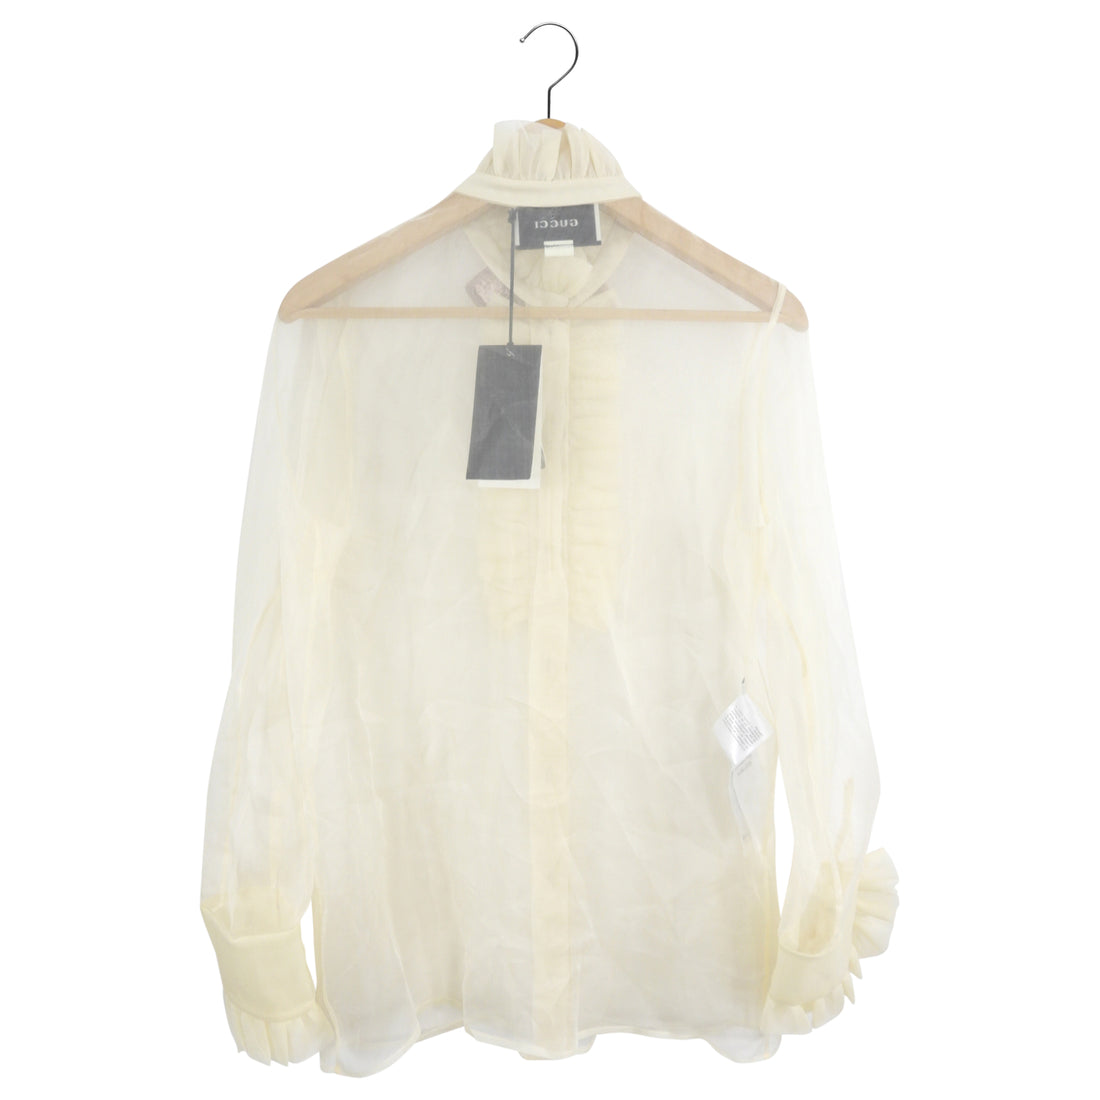 Gucci Ivory Sheer Organza Ruffle Blouse with Sequin Collar - M